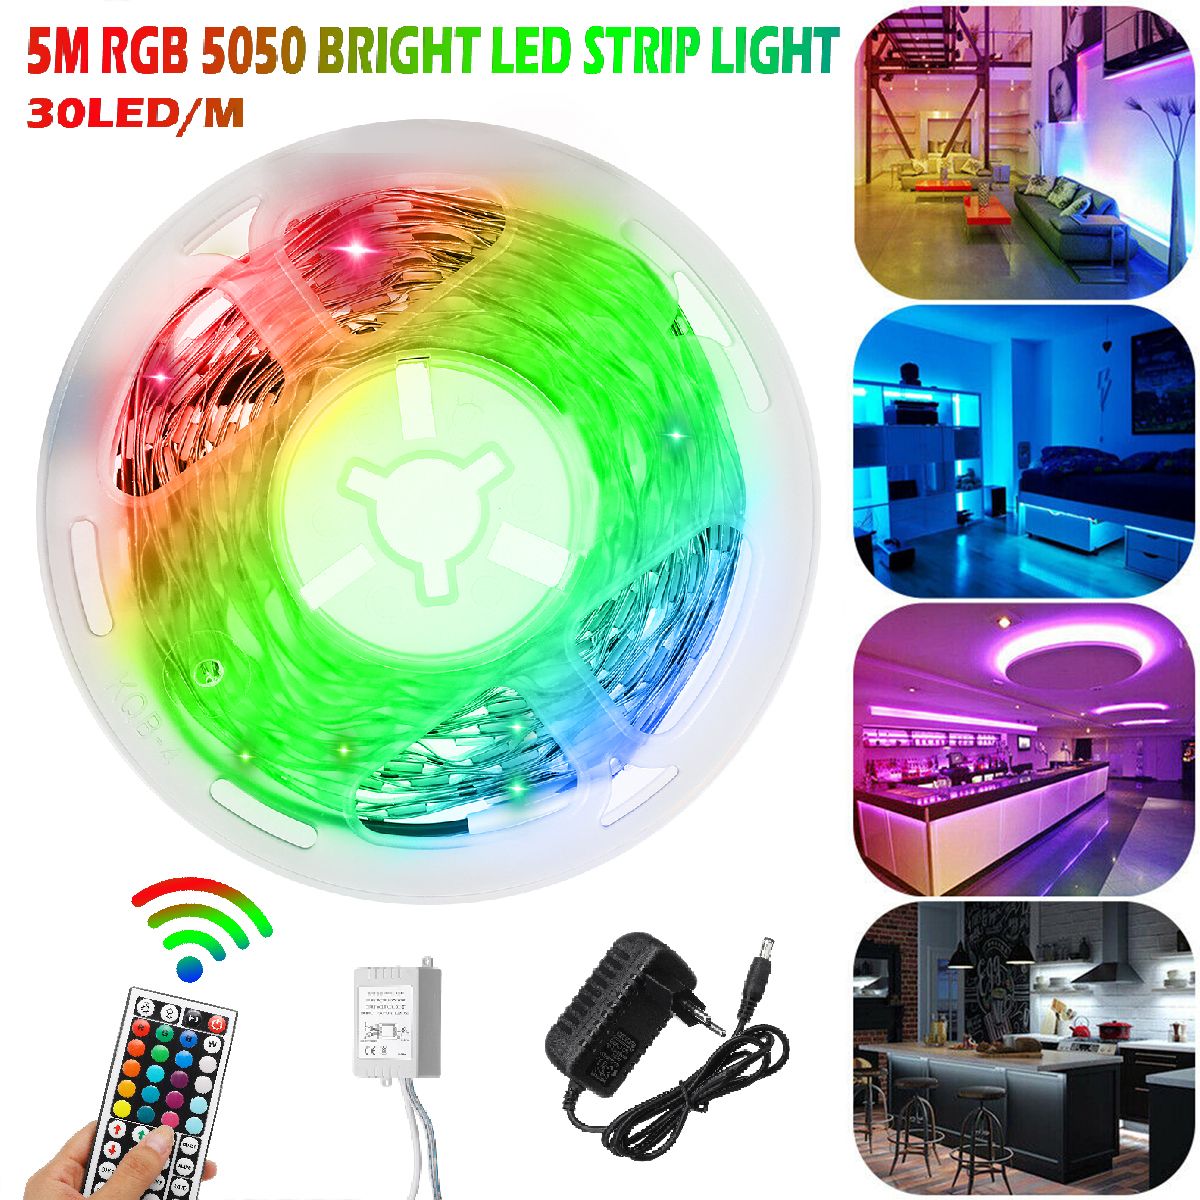 5M-RGB-5050-NOT-Waterproof-LED-Strip-Light-SMD-With-44-Key-Remote-Controller-1691938